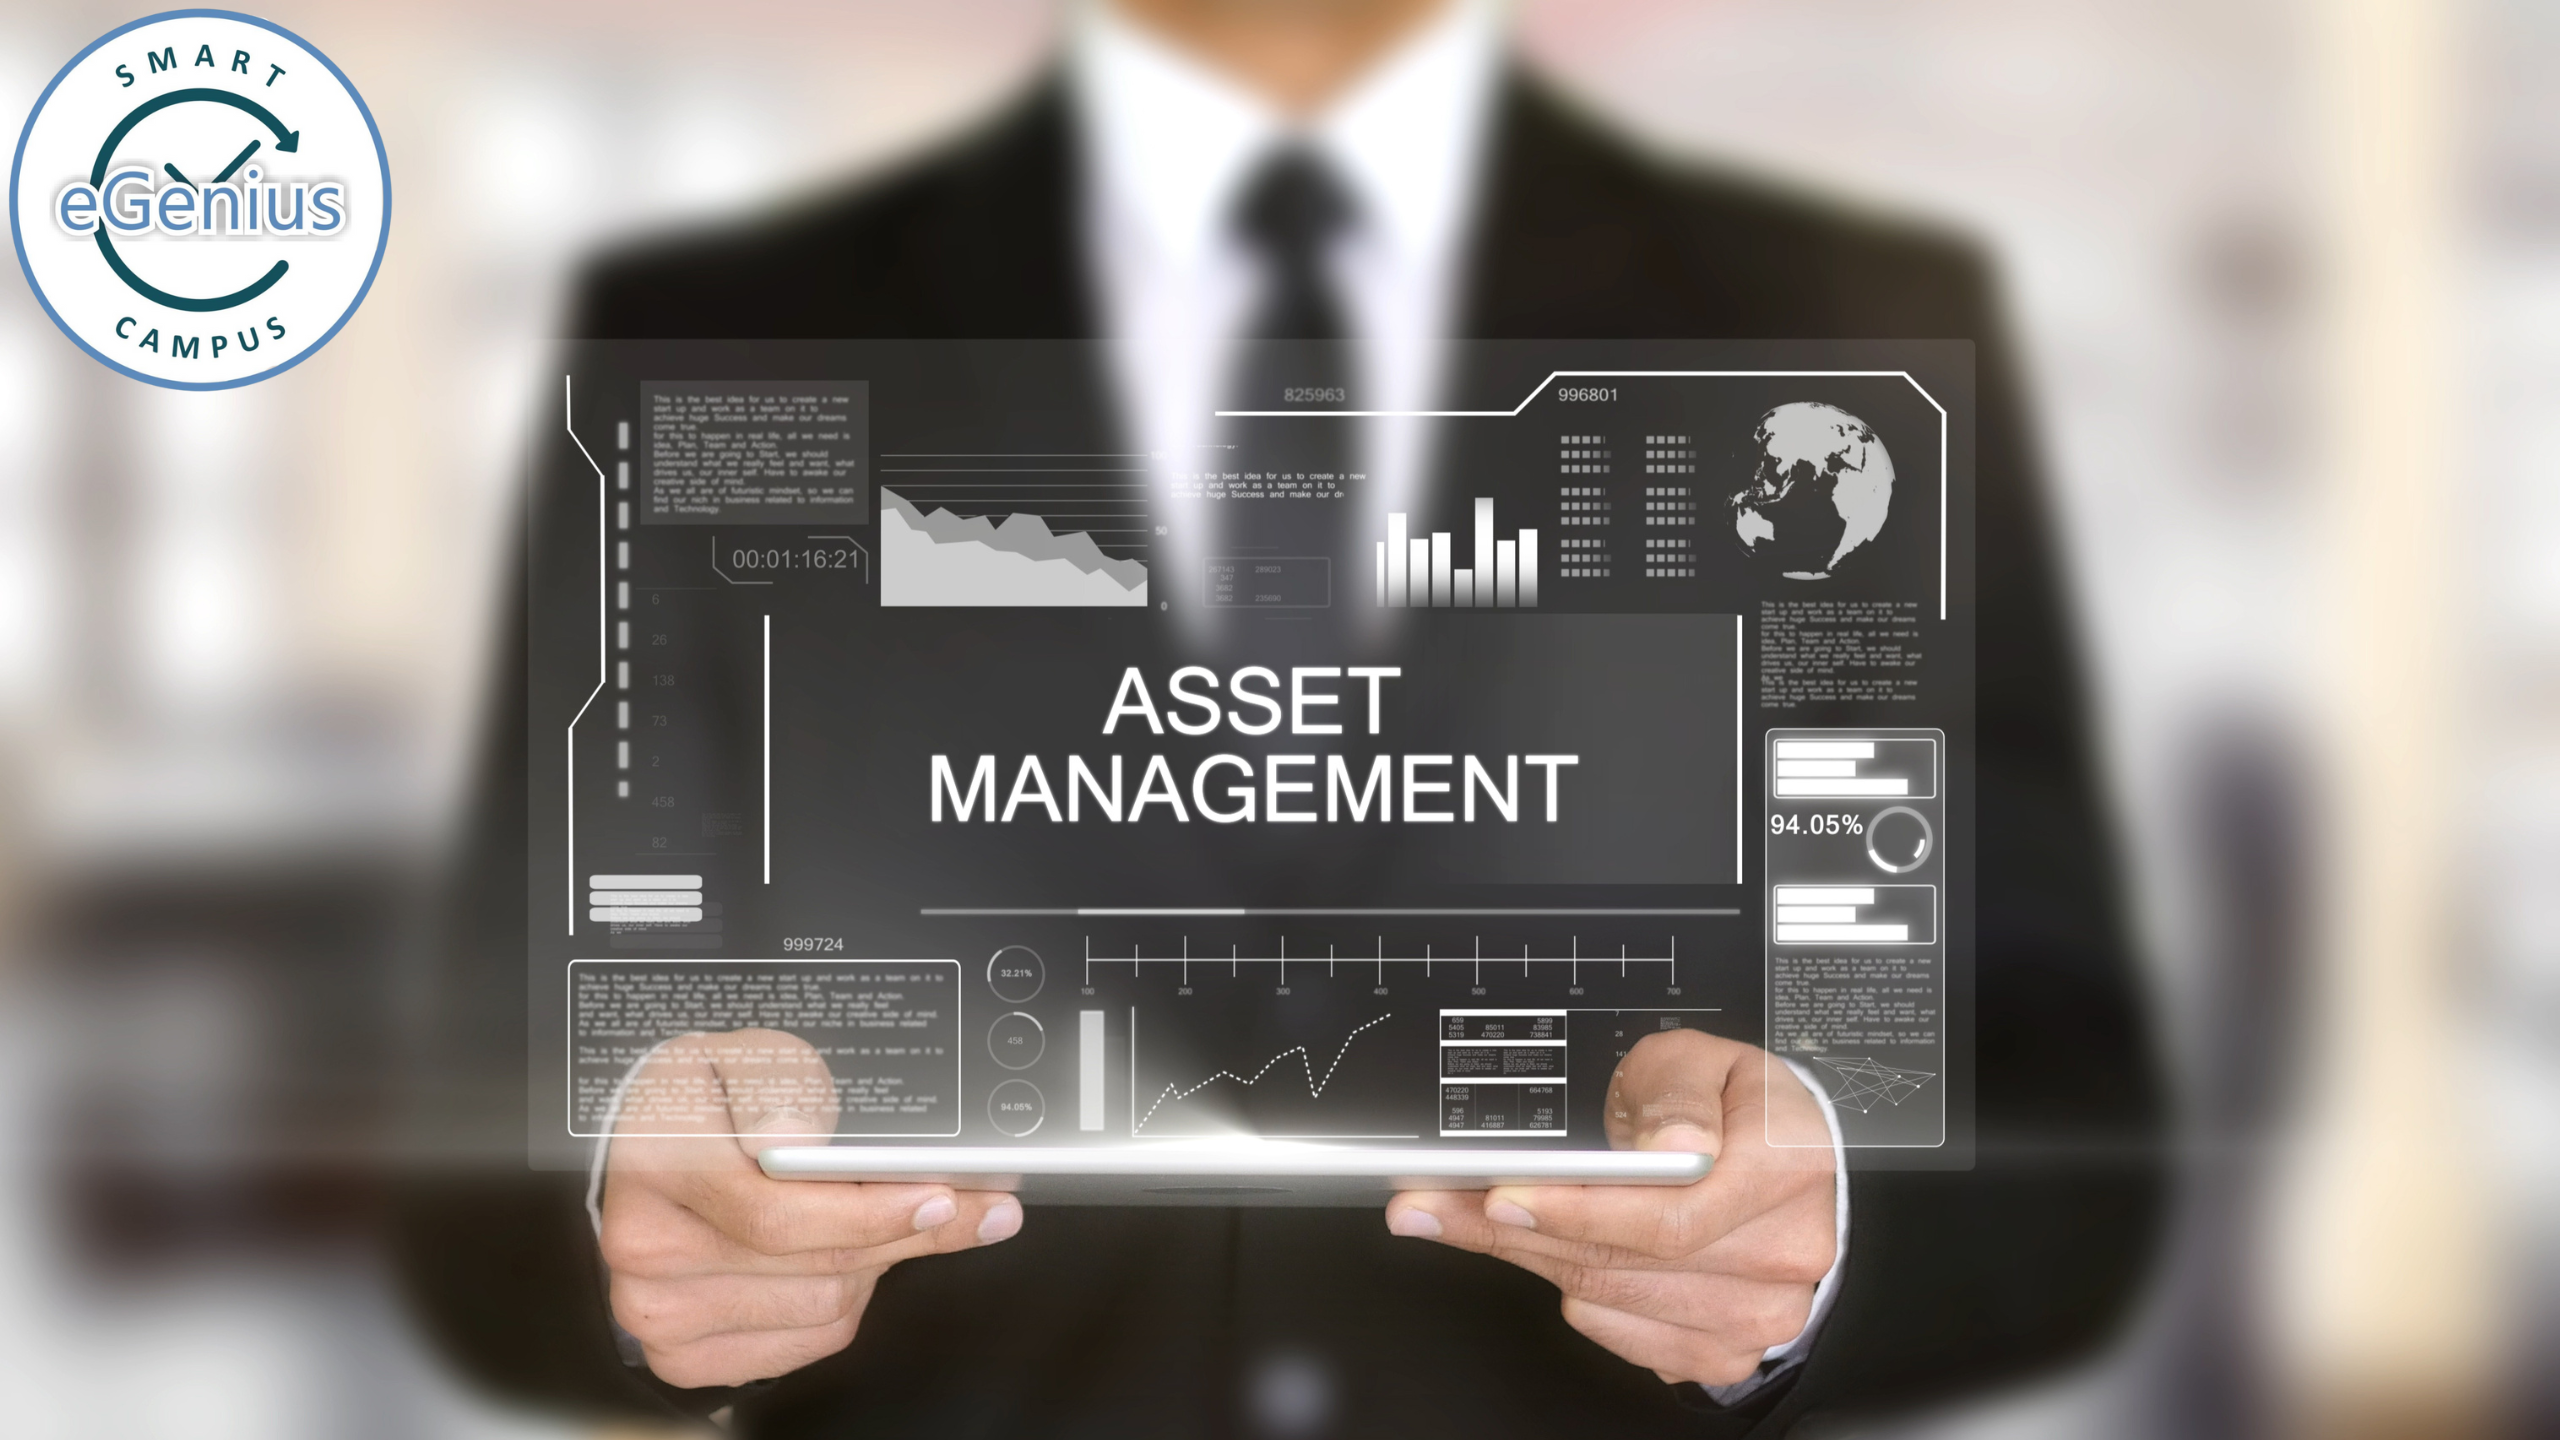 Asset Management – How is it helpful?